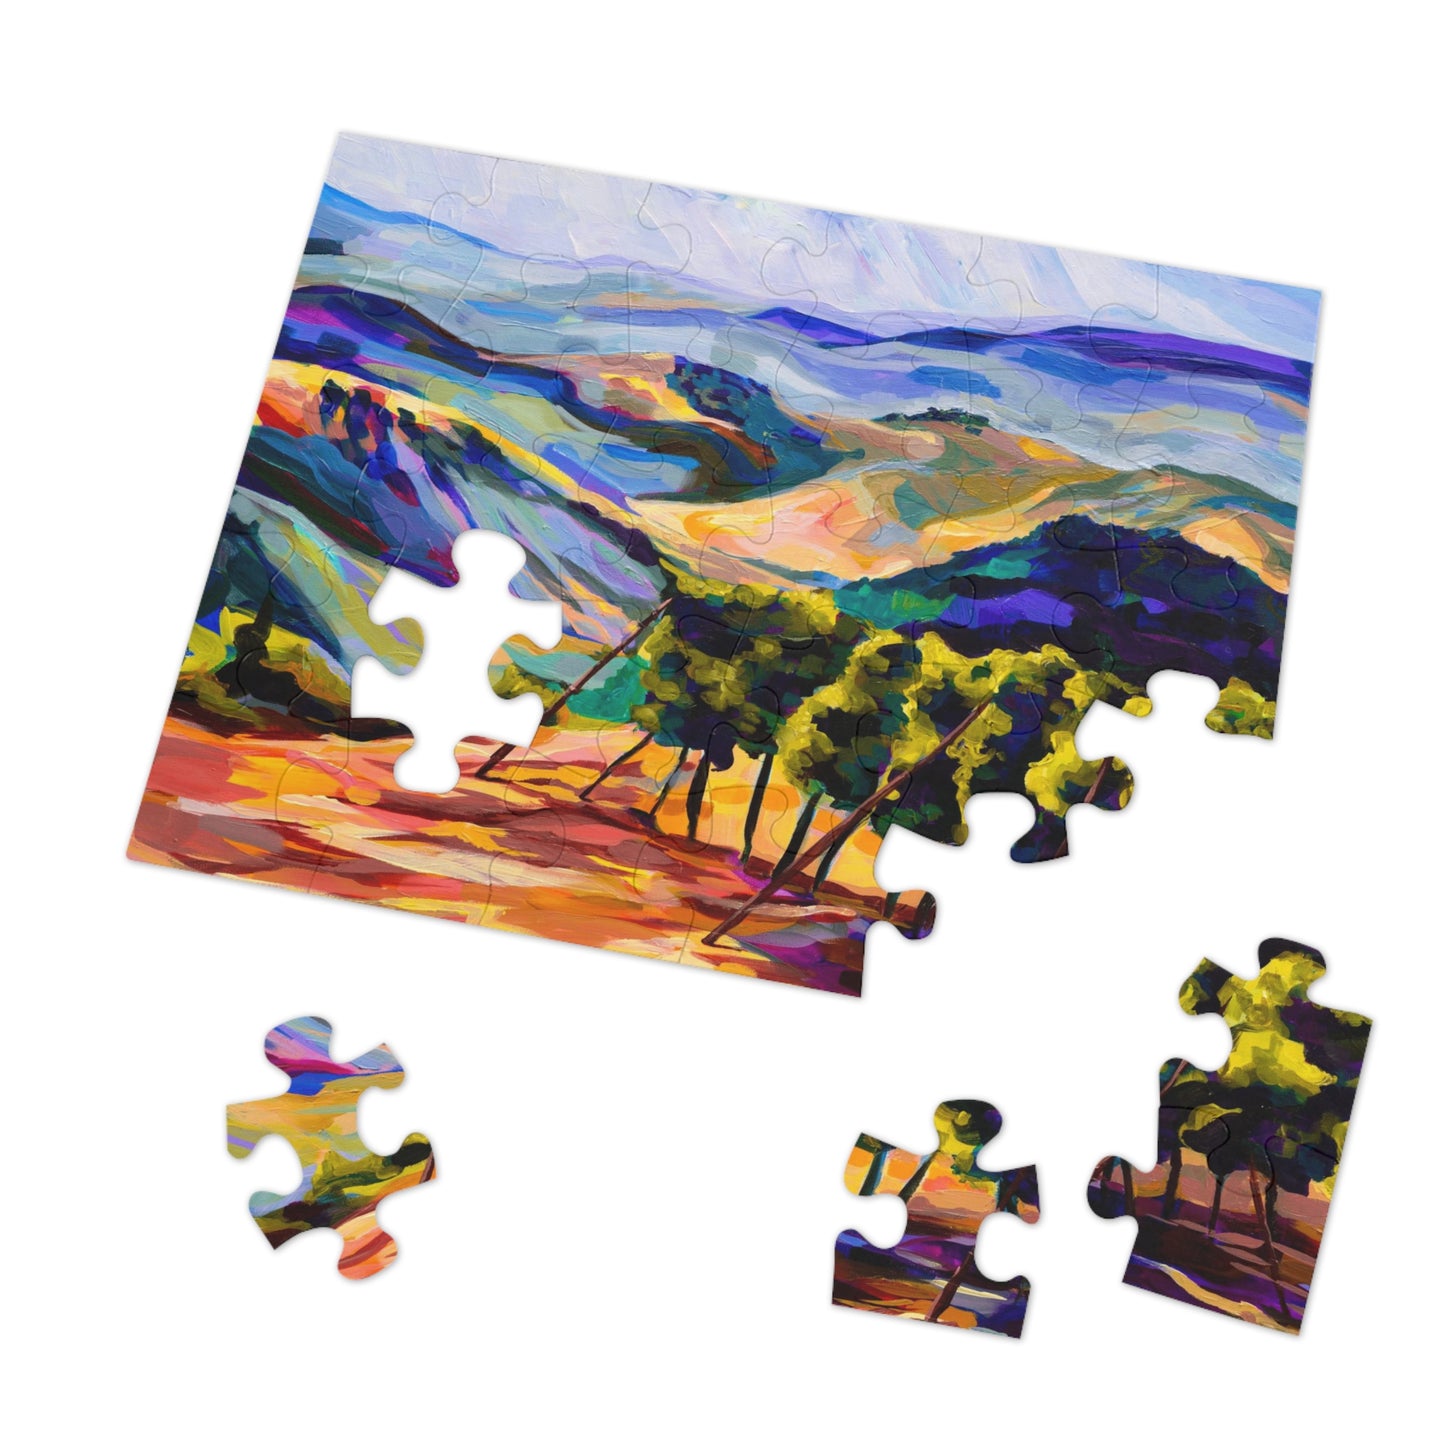 “Mountaintop Vineyard Outside Jerusalem” Painting by Leah Luria Jigsaw Puzzle (30, 110, 252, 500,1000-Piece)